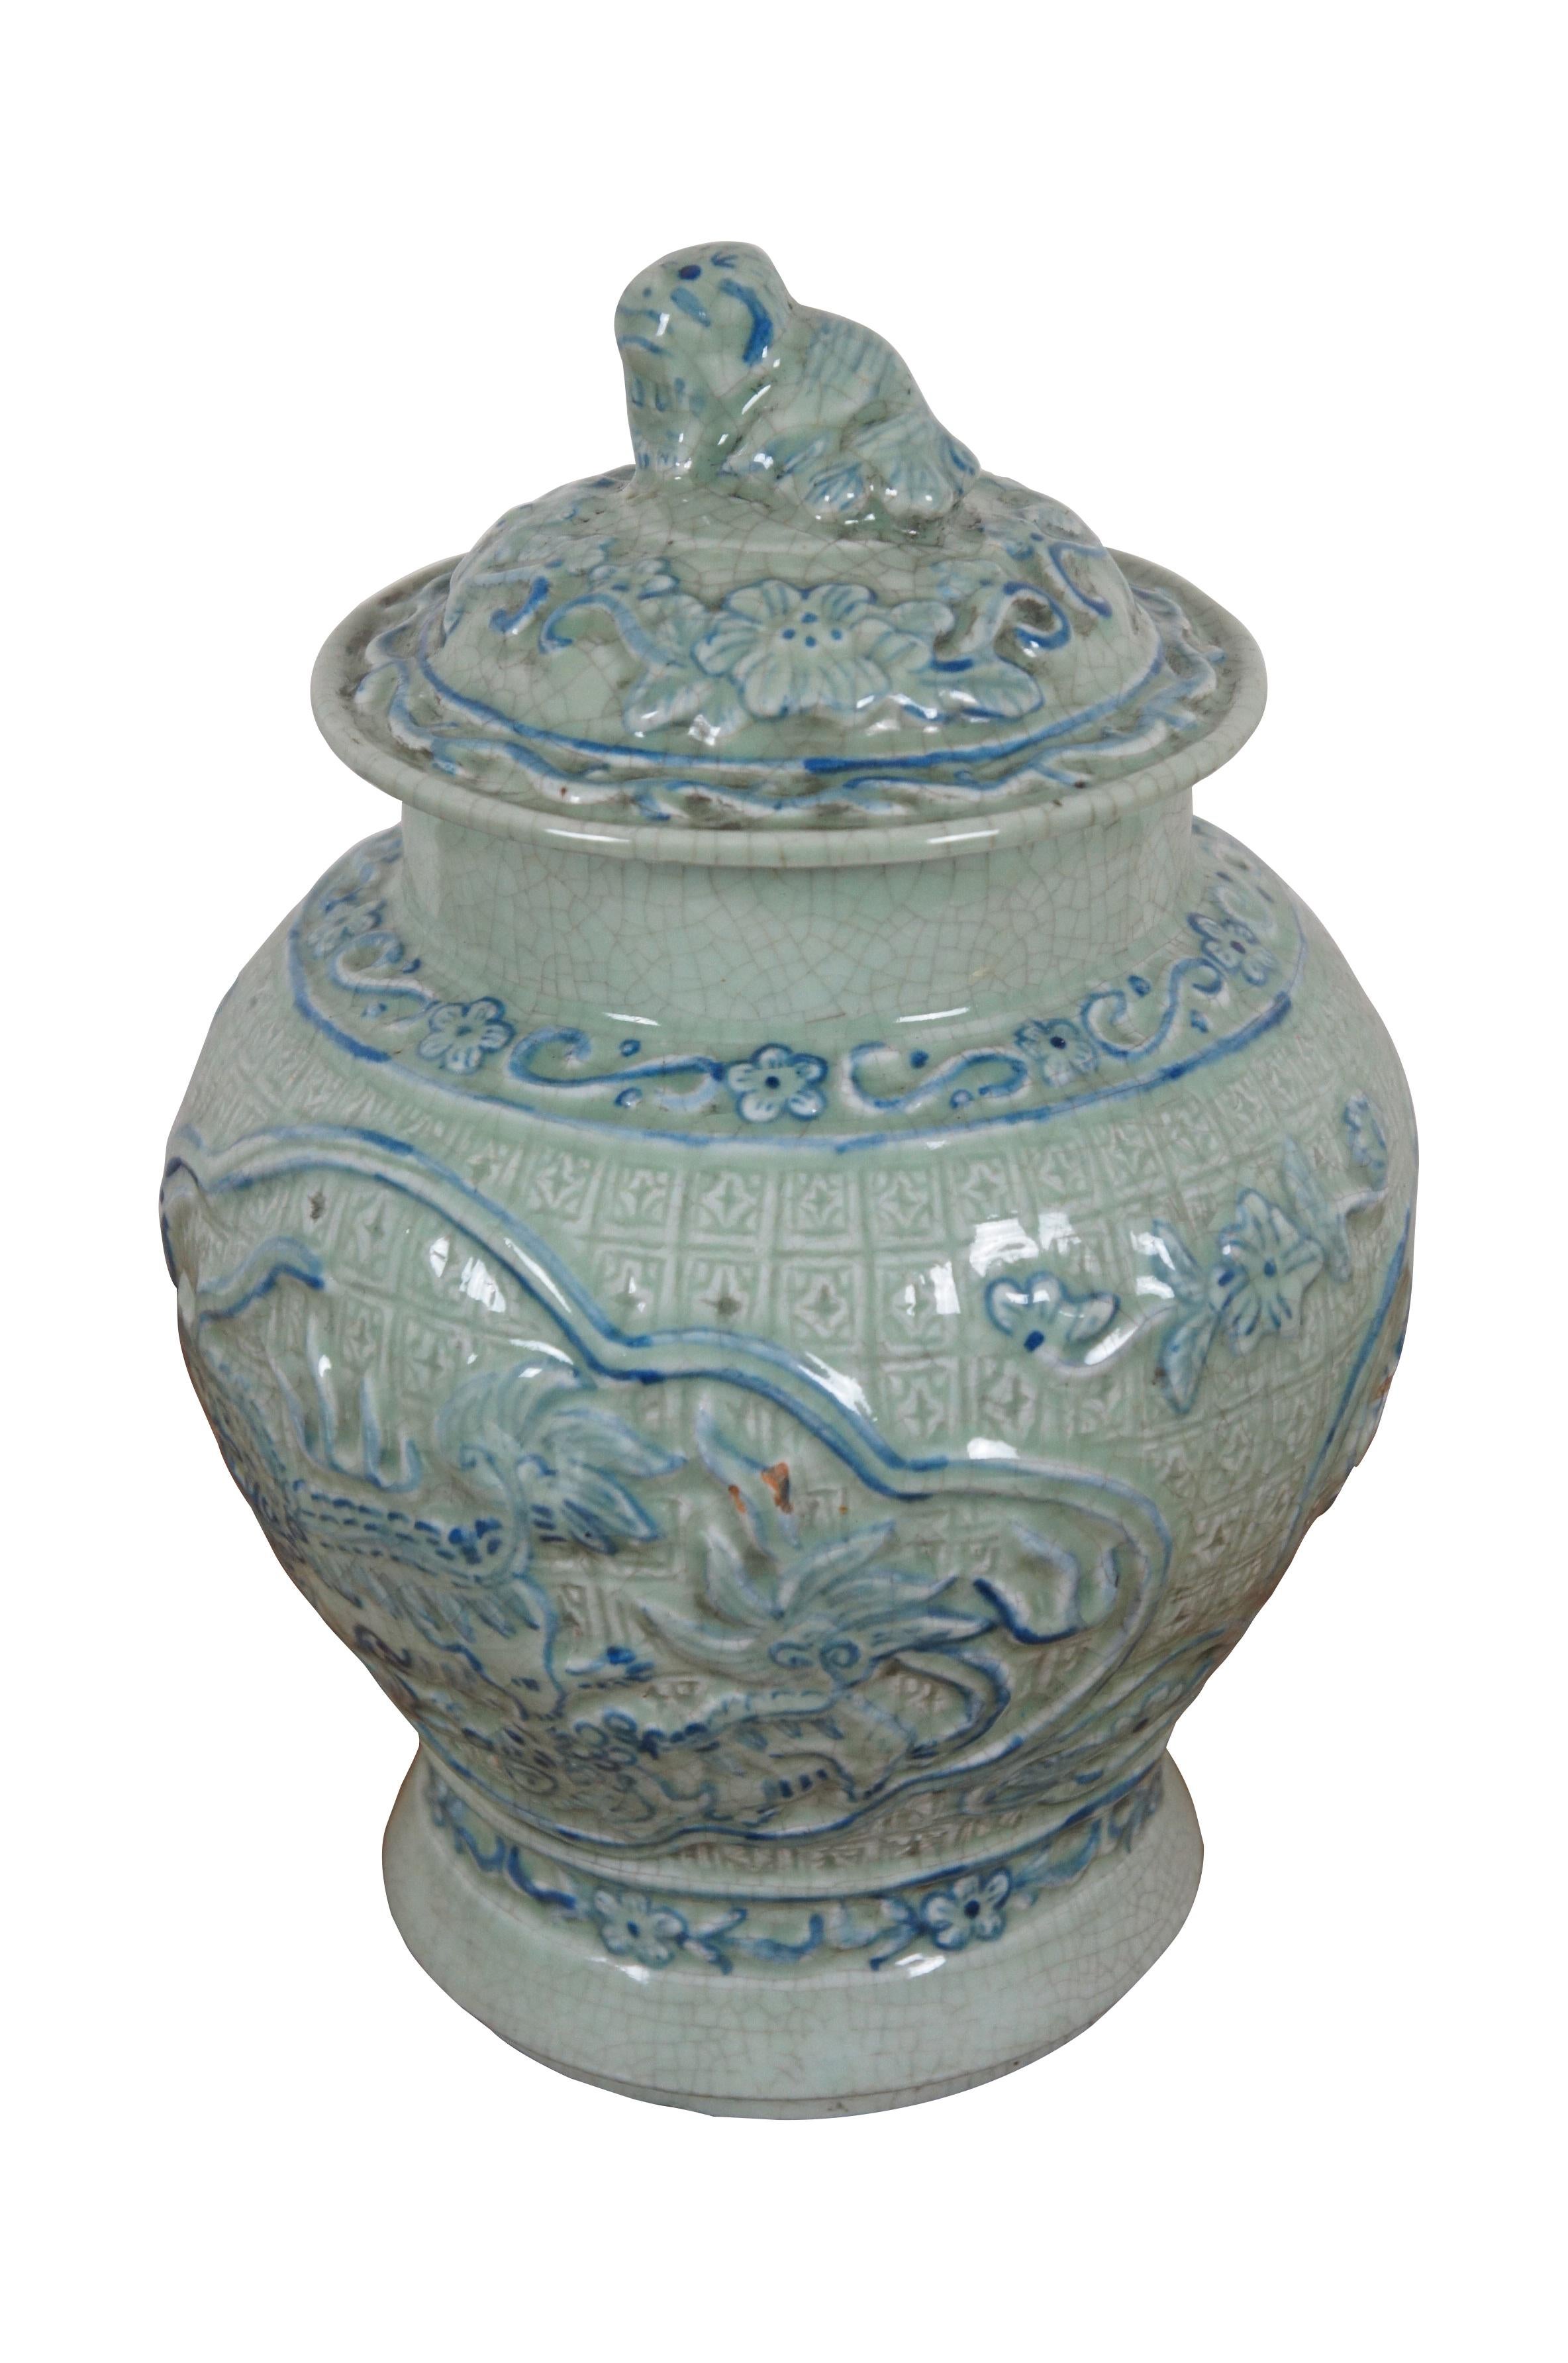 Chinese ginger jar / lidded urn crafted of pale celadon green, crackle glaze porcelain with blue painted details, intricately molded with floral patterns and guardian lions / fu dogs.

Dimensions:
7.75